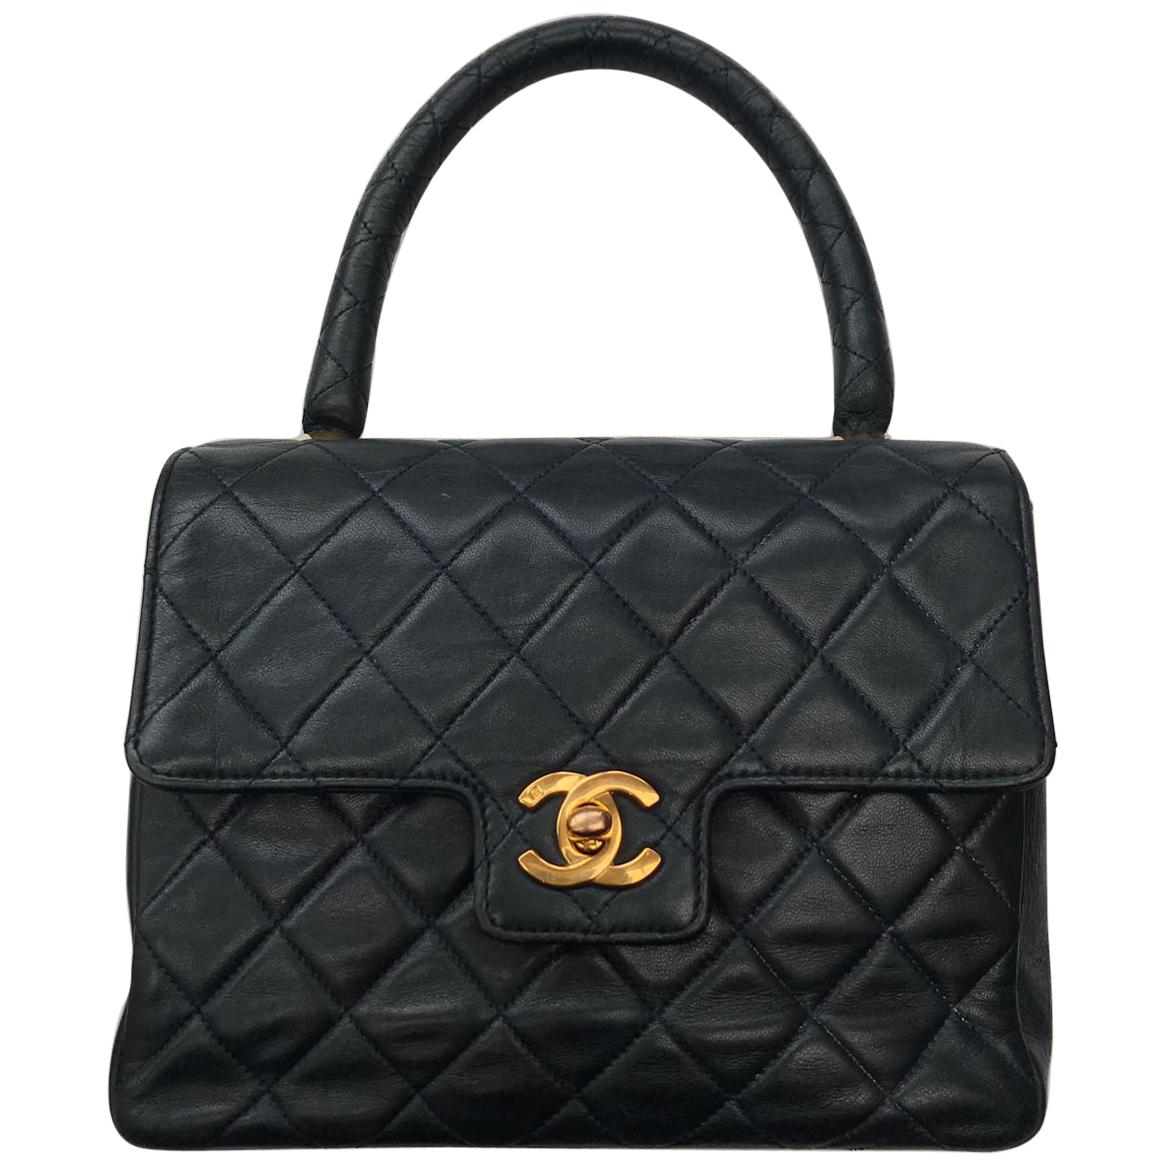 Chanel charming midnight blue quilted leather bag For Sale